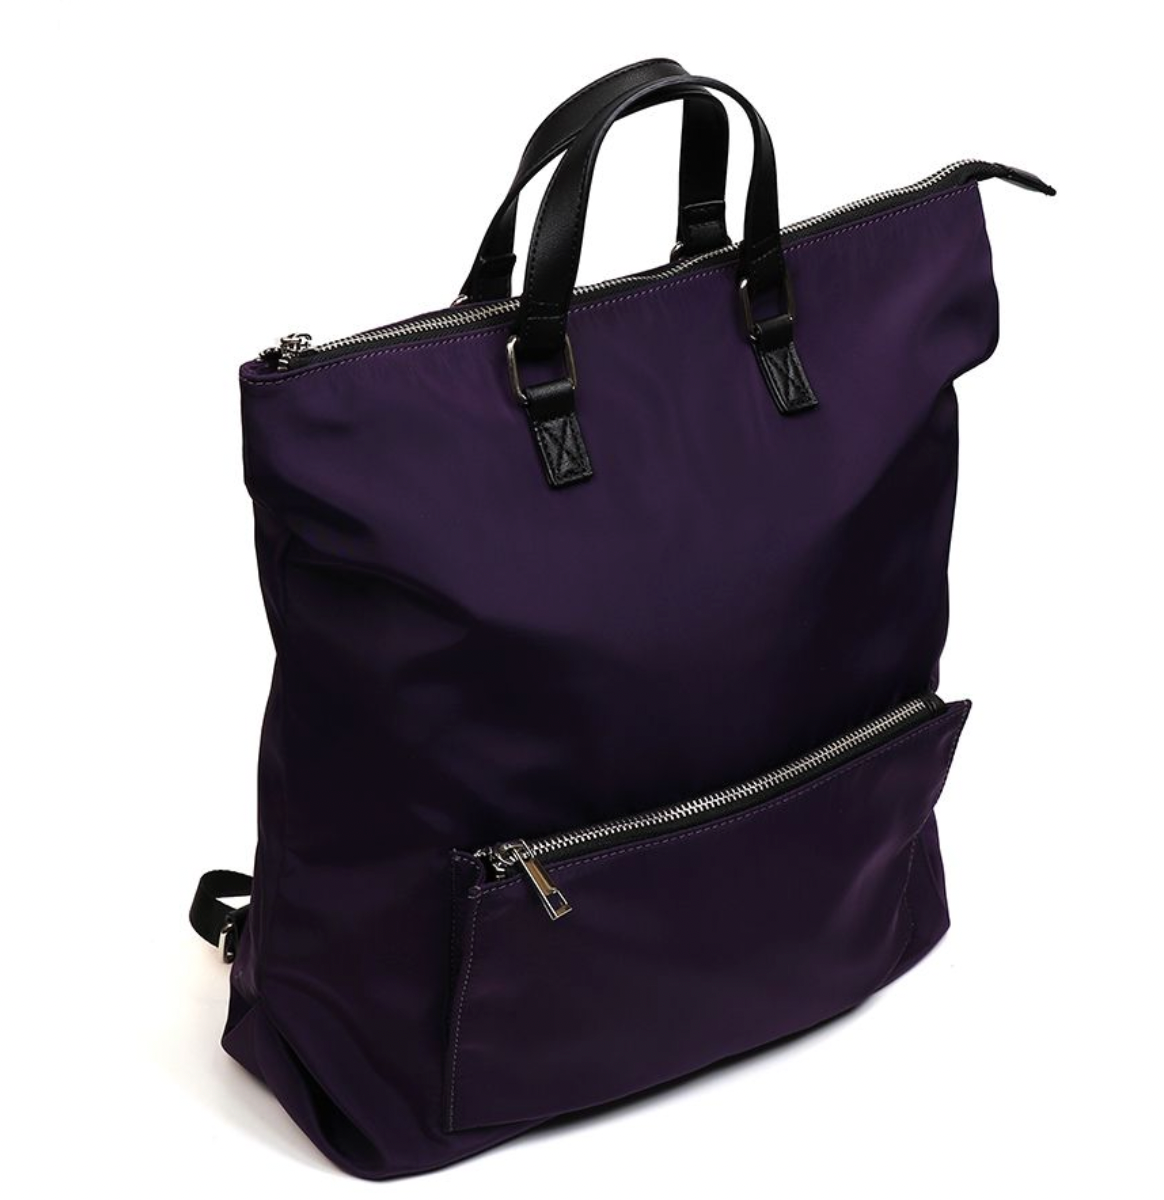 Purple nylon backpack with zip front pocket